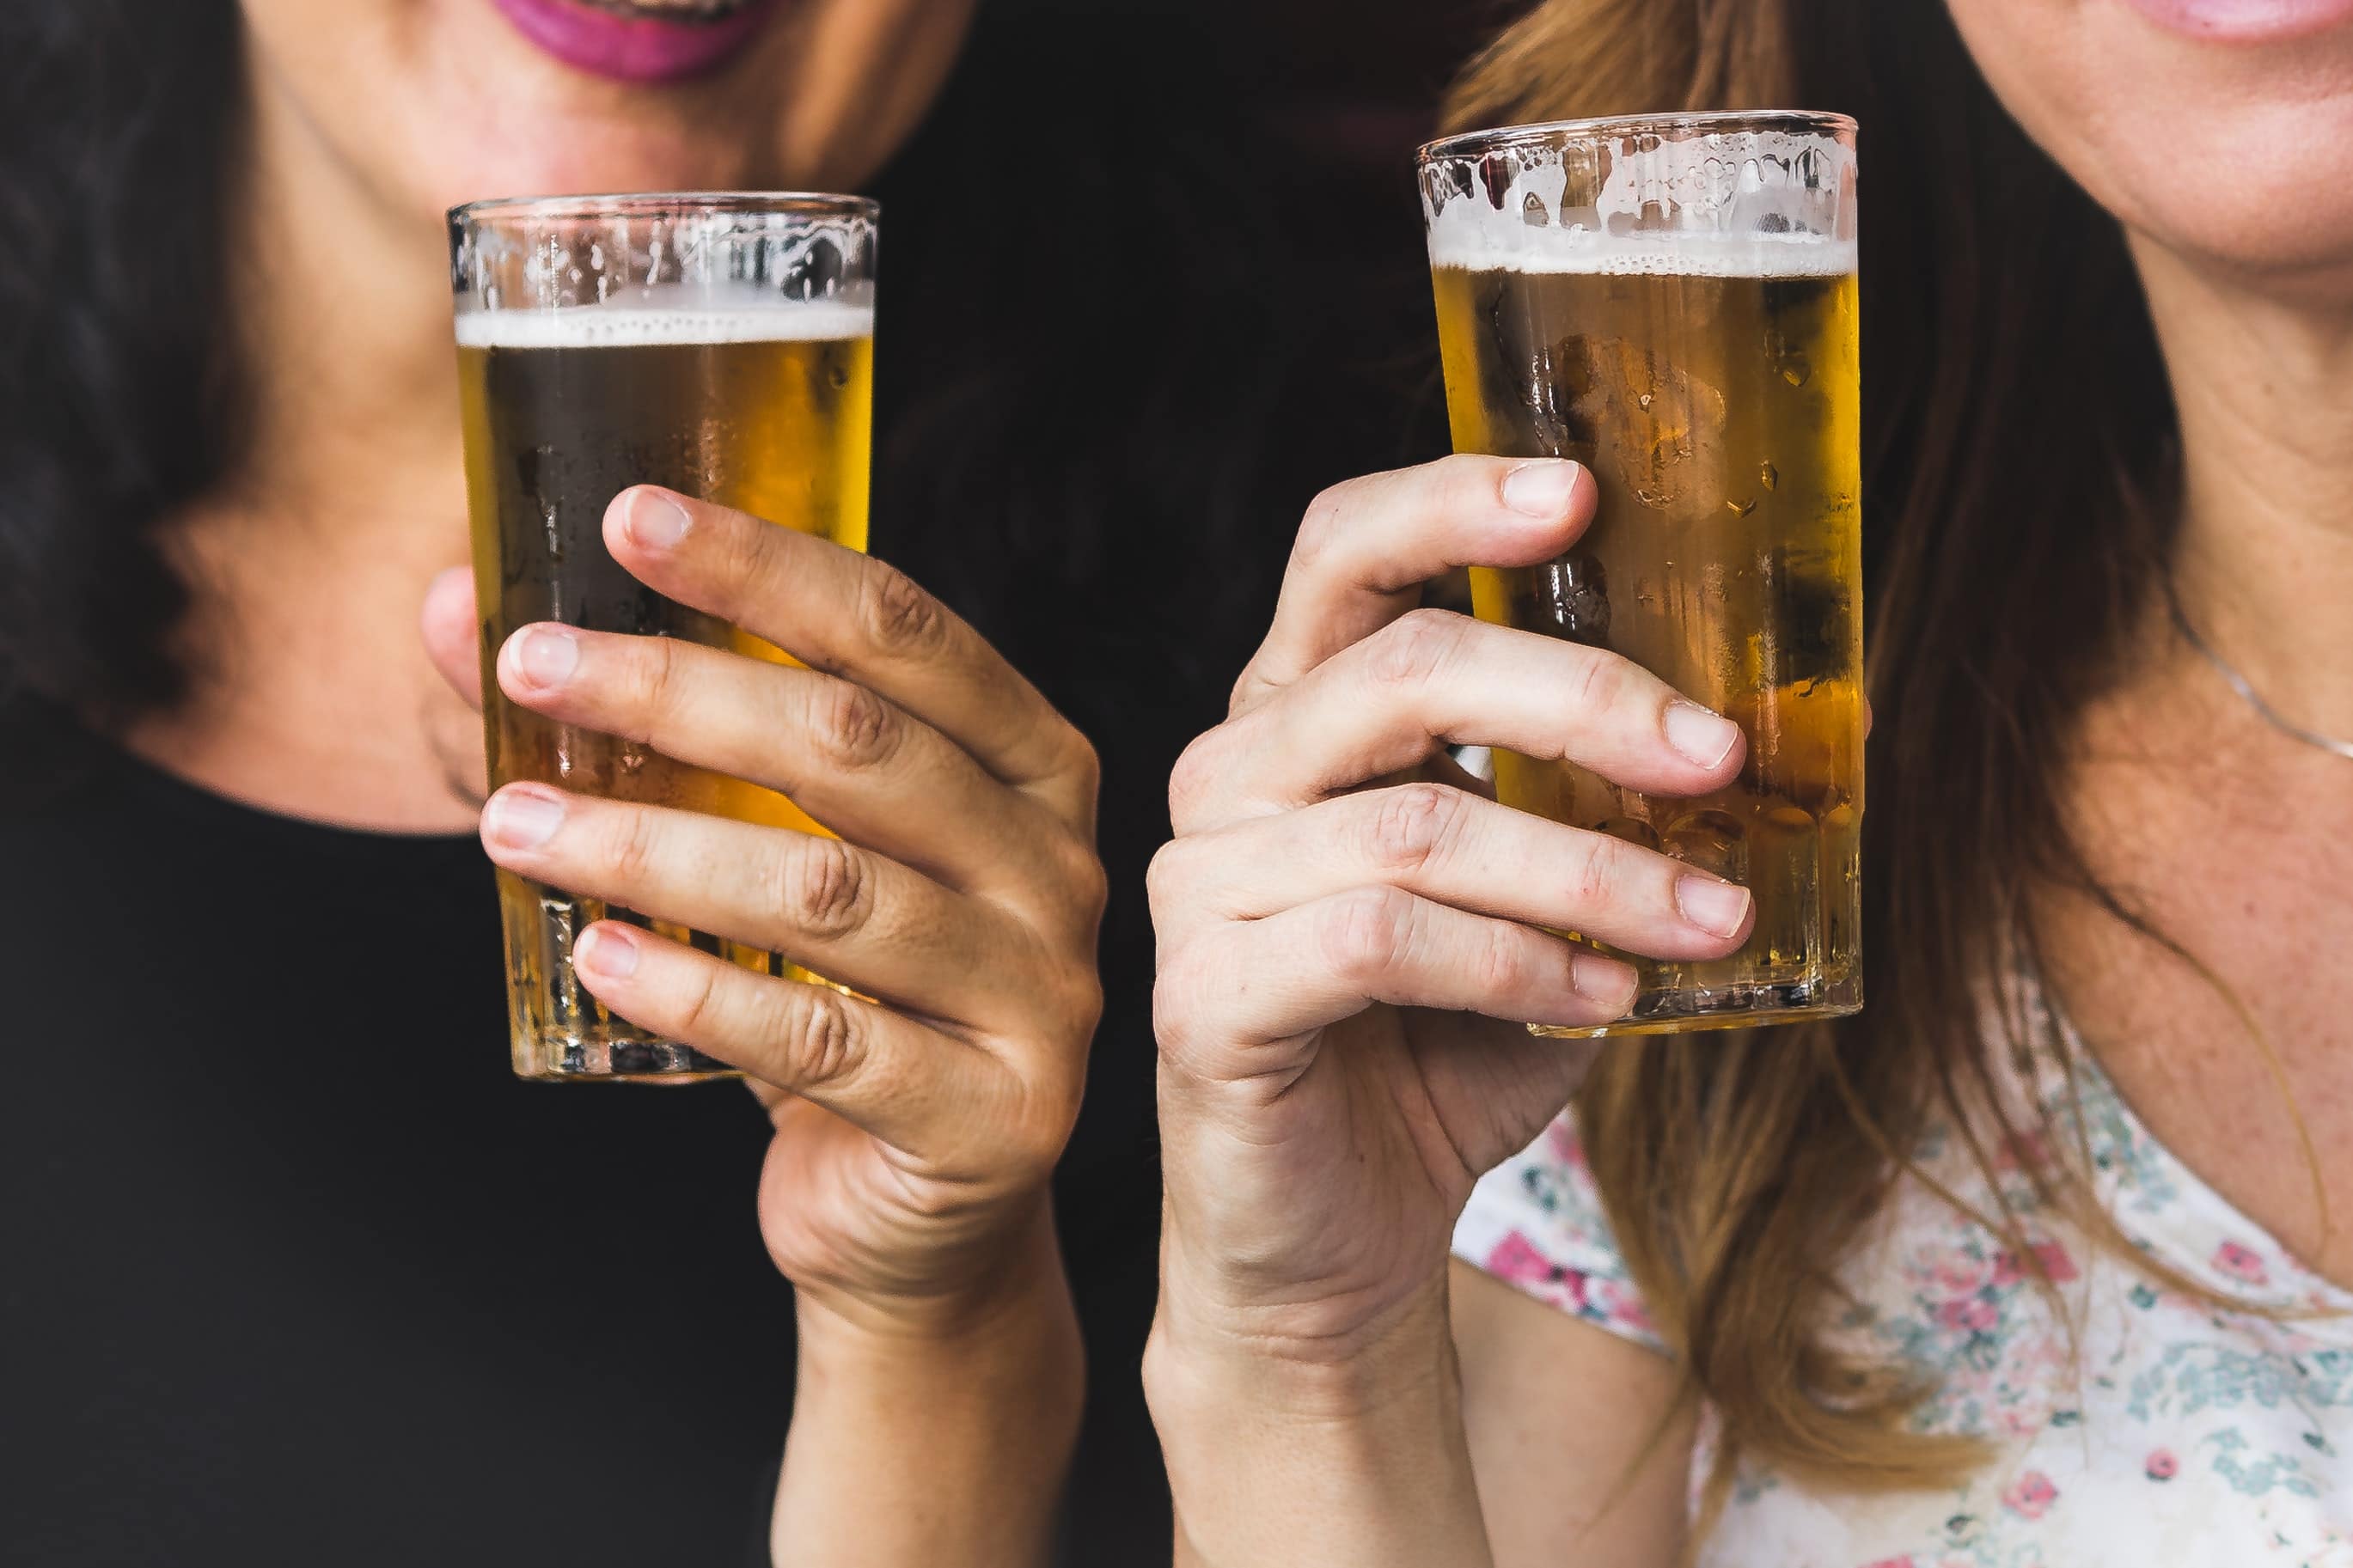 How did Stella Artois use Consumer Insights to beat their Competitor